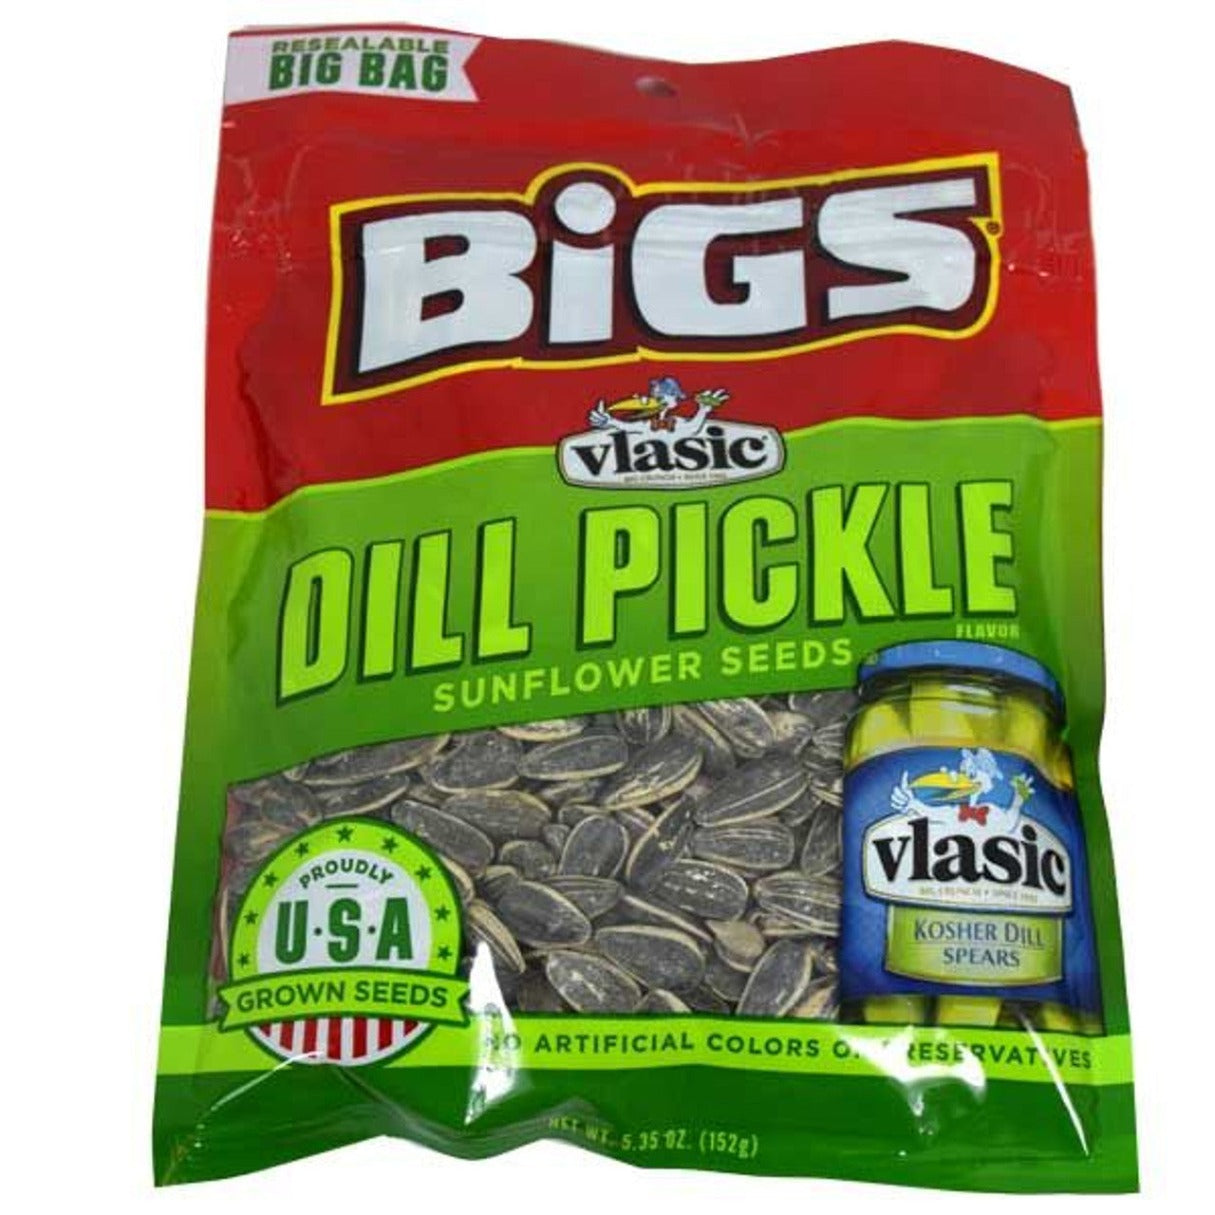 Bigs Dill Pickle Sunflower Seeds 5.35oz - 12ct